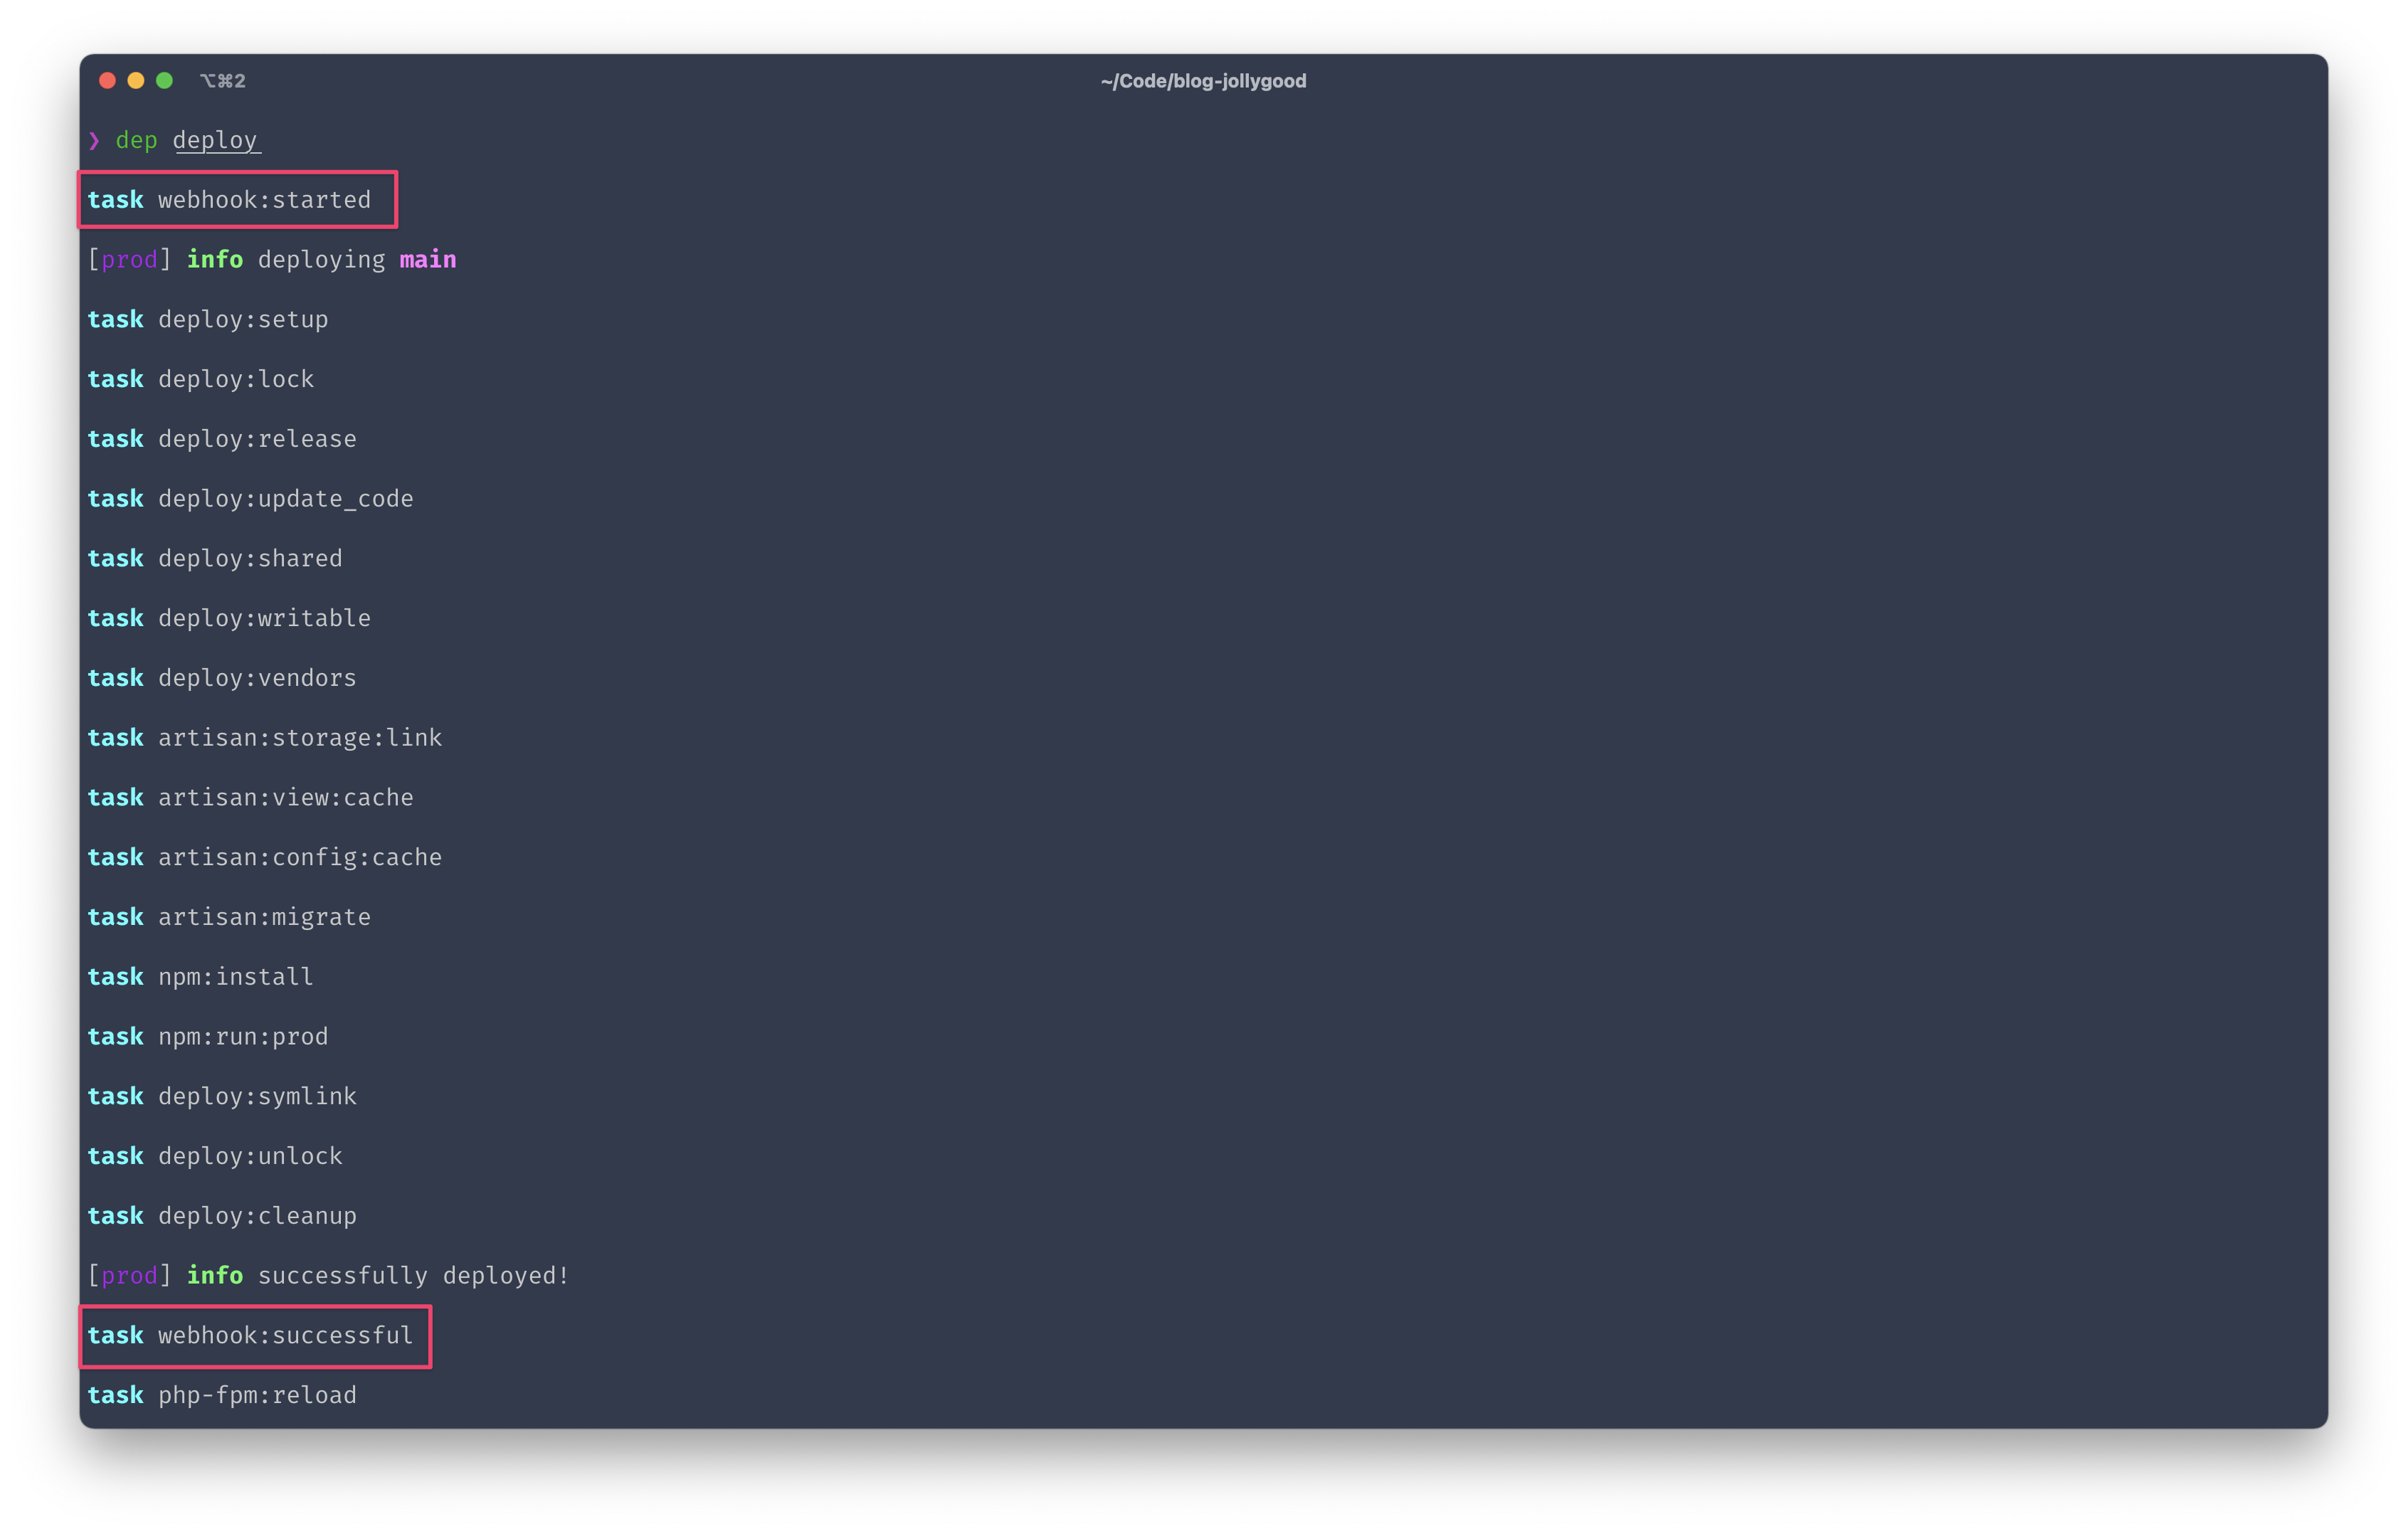 Screenshot of the terminal output for &quot;dep deploy&quot;. It shows all our tasks including &quot;webhook:started&quot; and &quot;webhook:successful&quot;, respectively at the beginning and the end of the deployment.